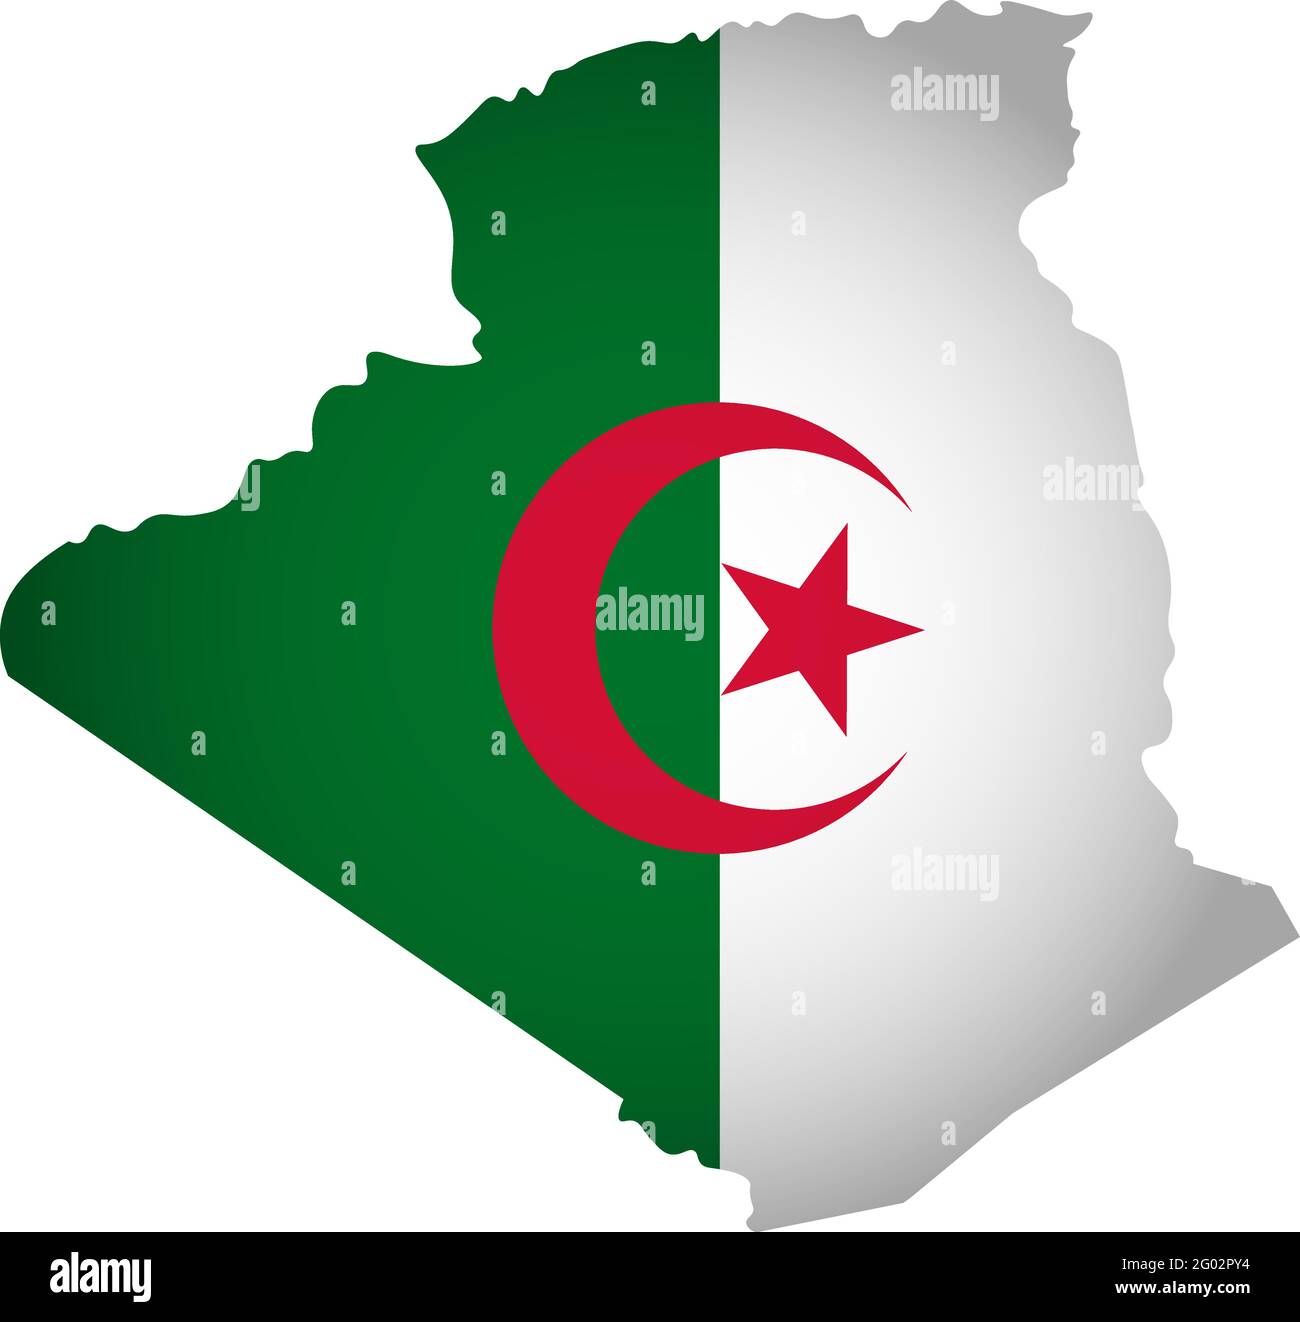 Illustration with Algerian national flag with simplified  shape of Algeria map (jpg). Volume shadow on the map Stock Vector